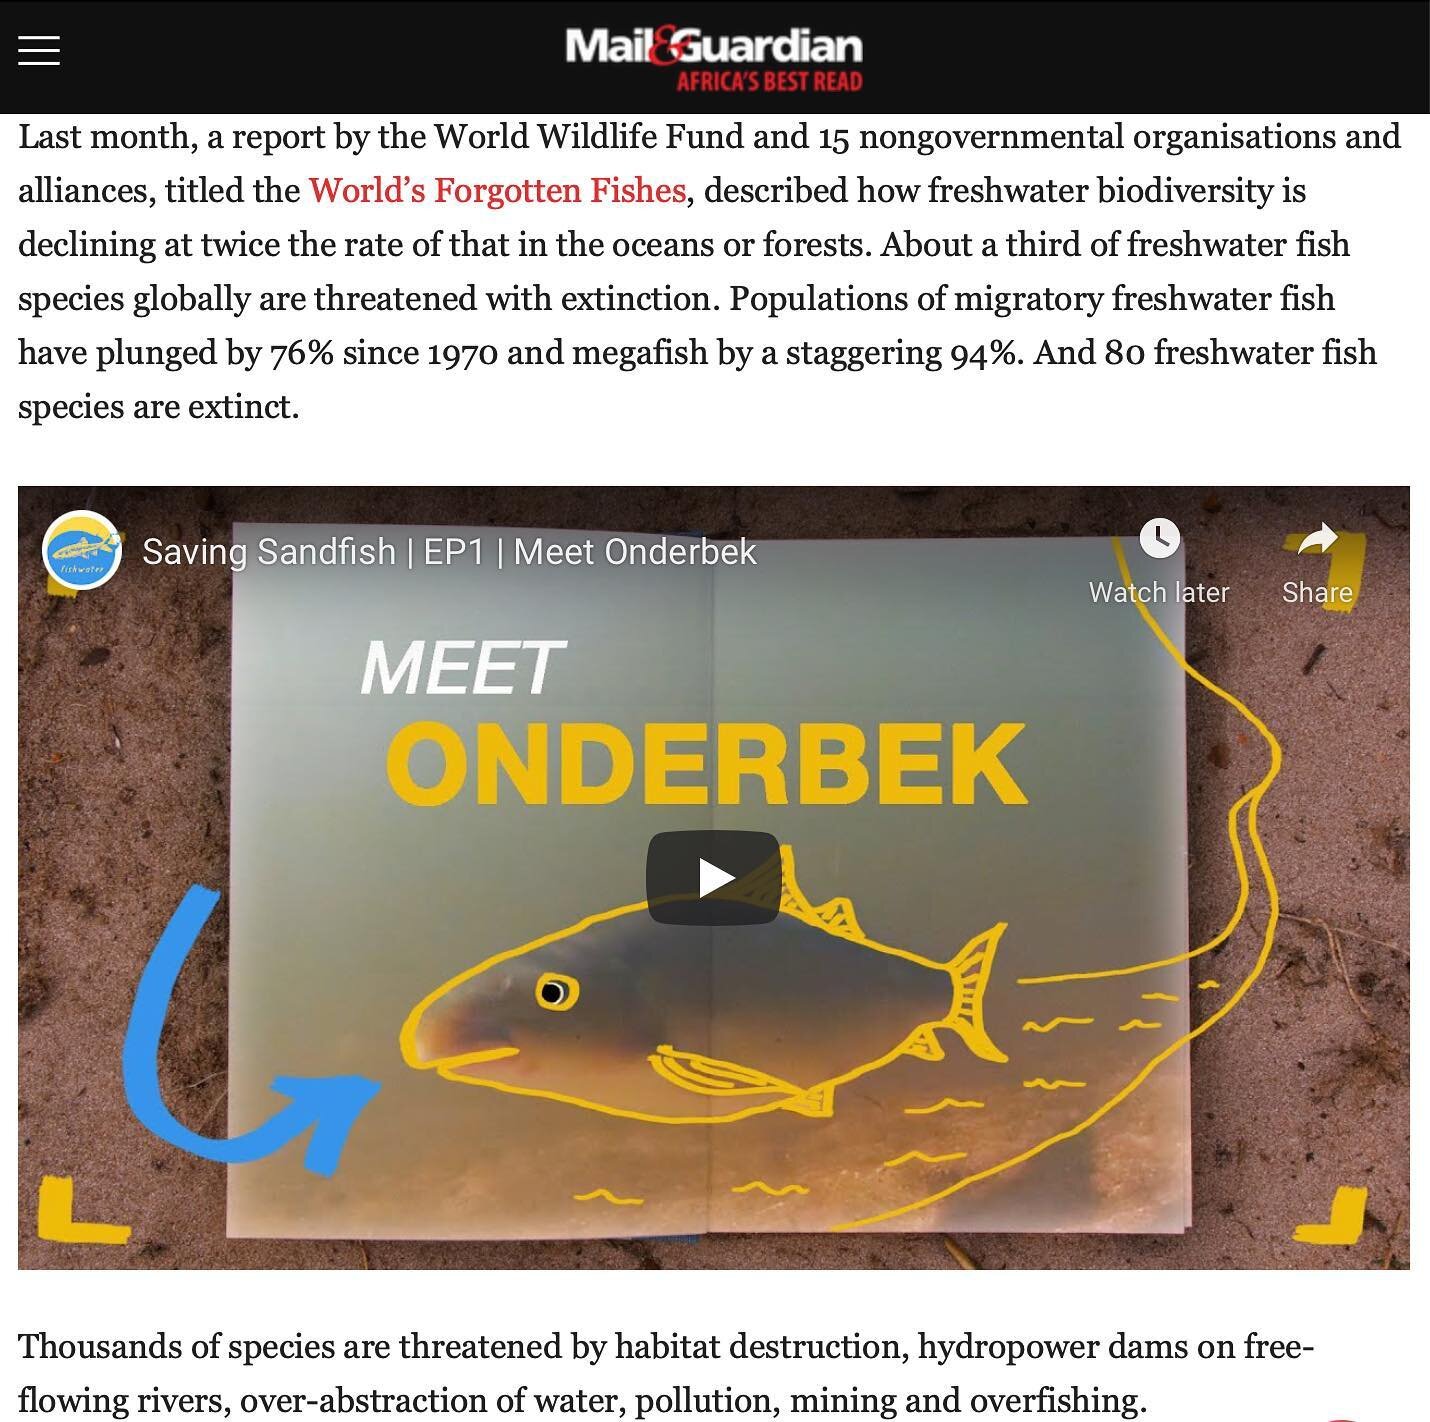 Thanks @mailandguardian for highlighting the plight and conservation needs of our fragile freshwater fishes, and for sharing #onderbek and the #savingsandfish story with you readers!